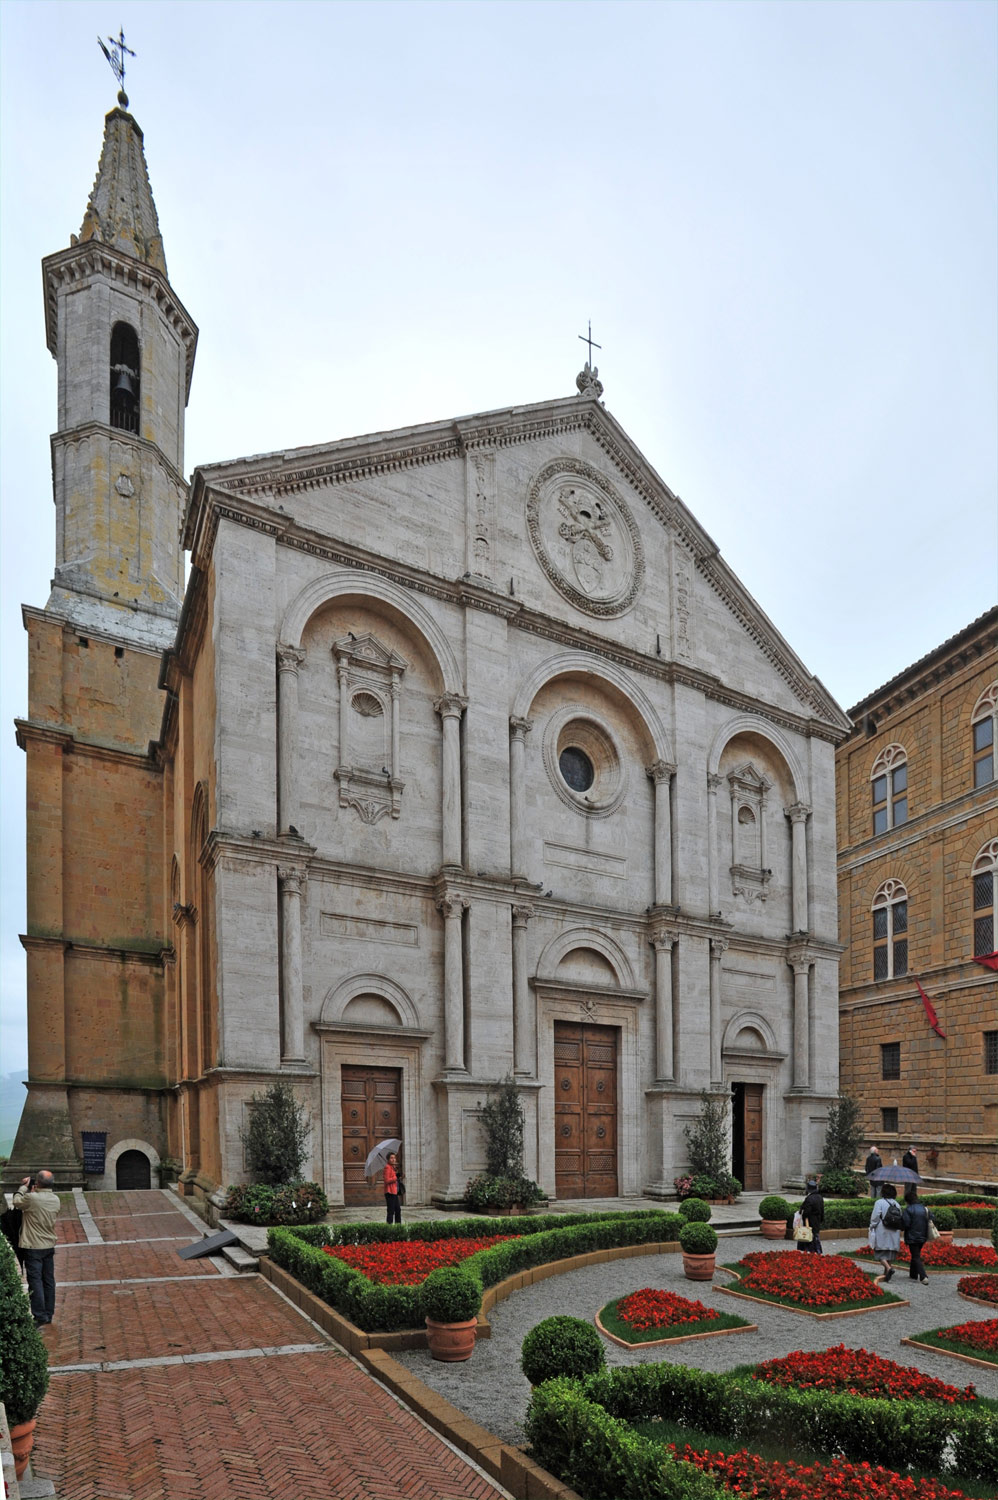 The Cathedral of Pienza